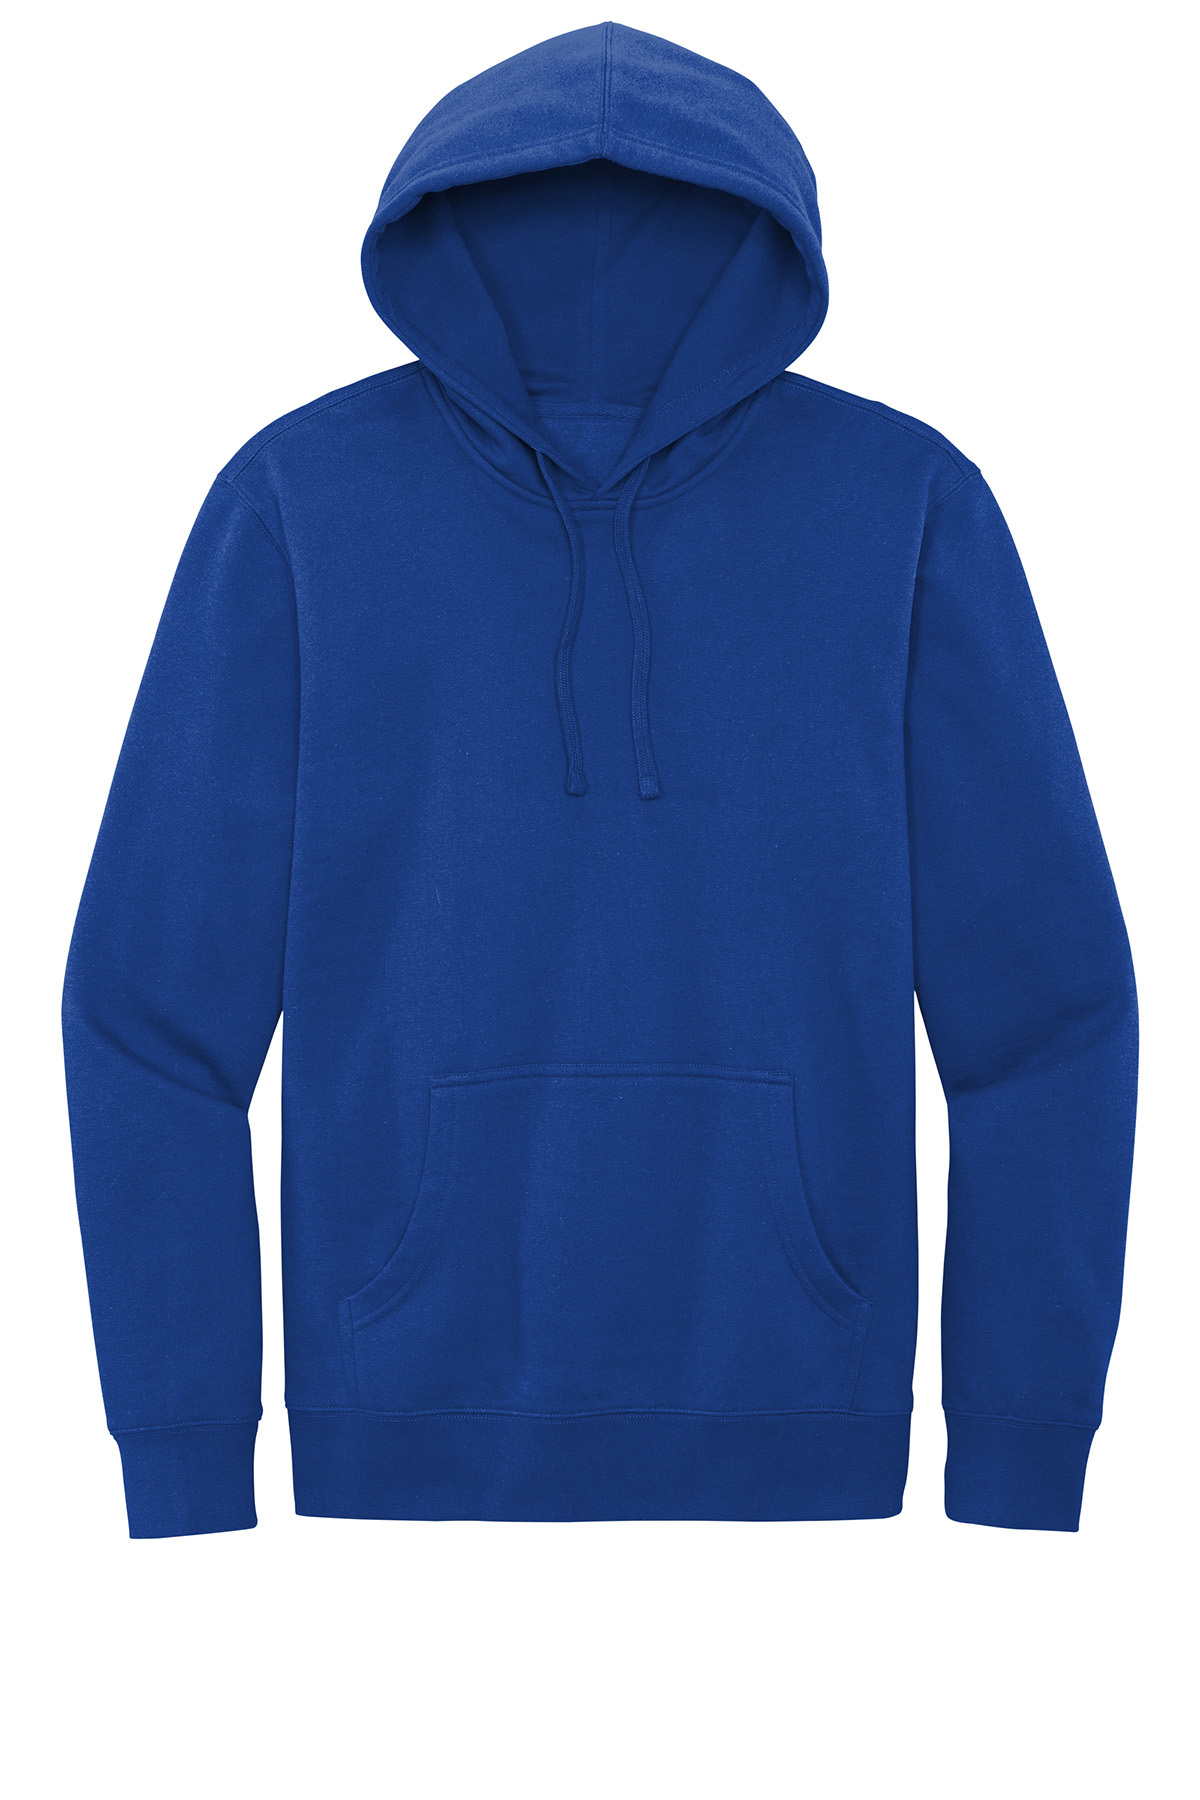 District V.I.T. Fleece Hoodie | Product | Company Casuals